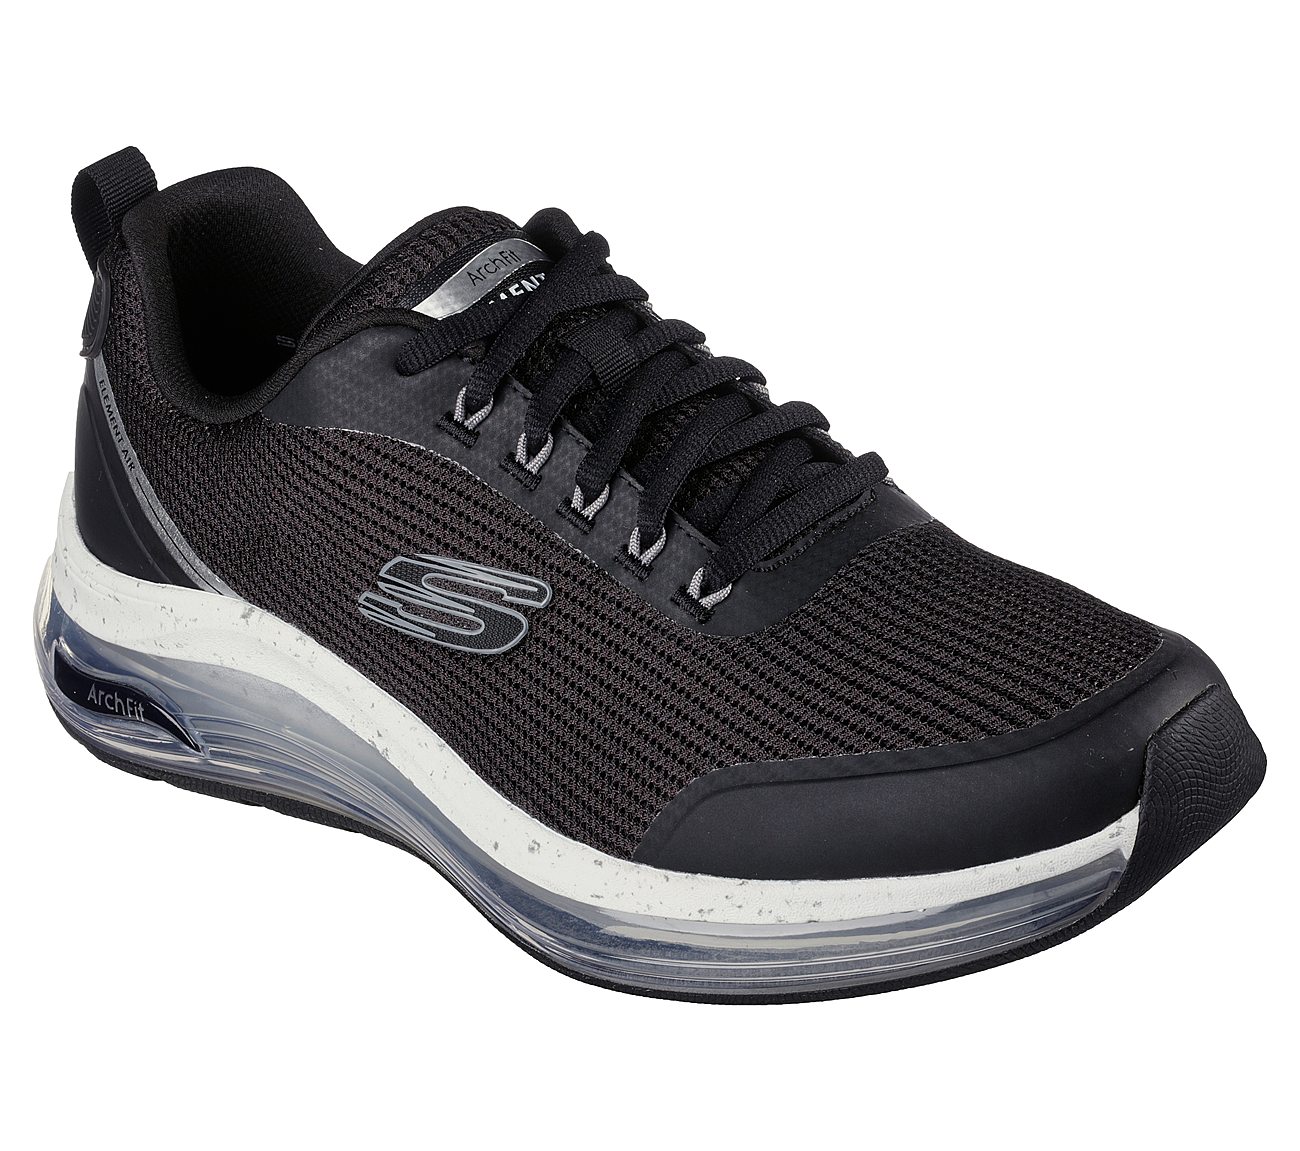 ARCH FIT ELEMENT AIR, BLACK/WHITE Footwear Right View